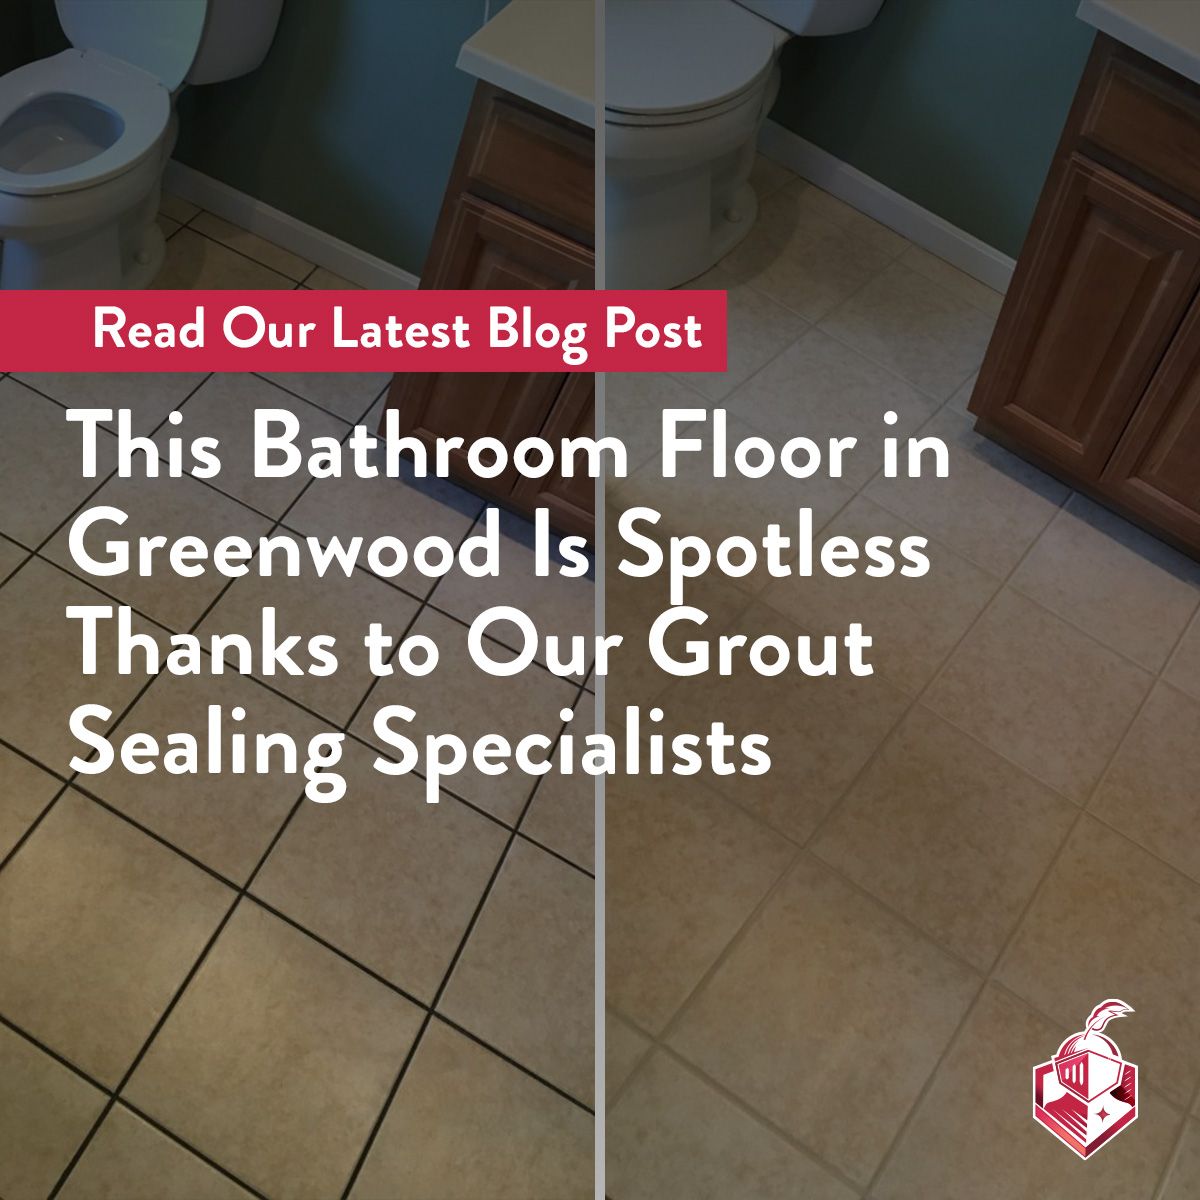 This Bathroom Floor in Greenwood Is Spotless Thanks to Our Grout Sealing Specialists